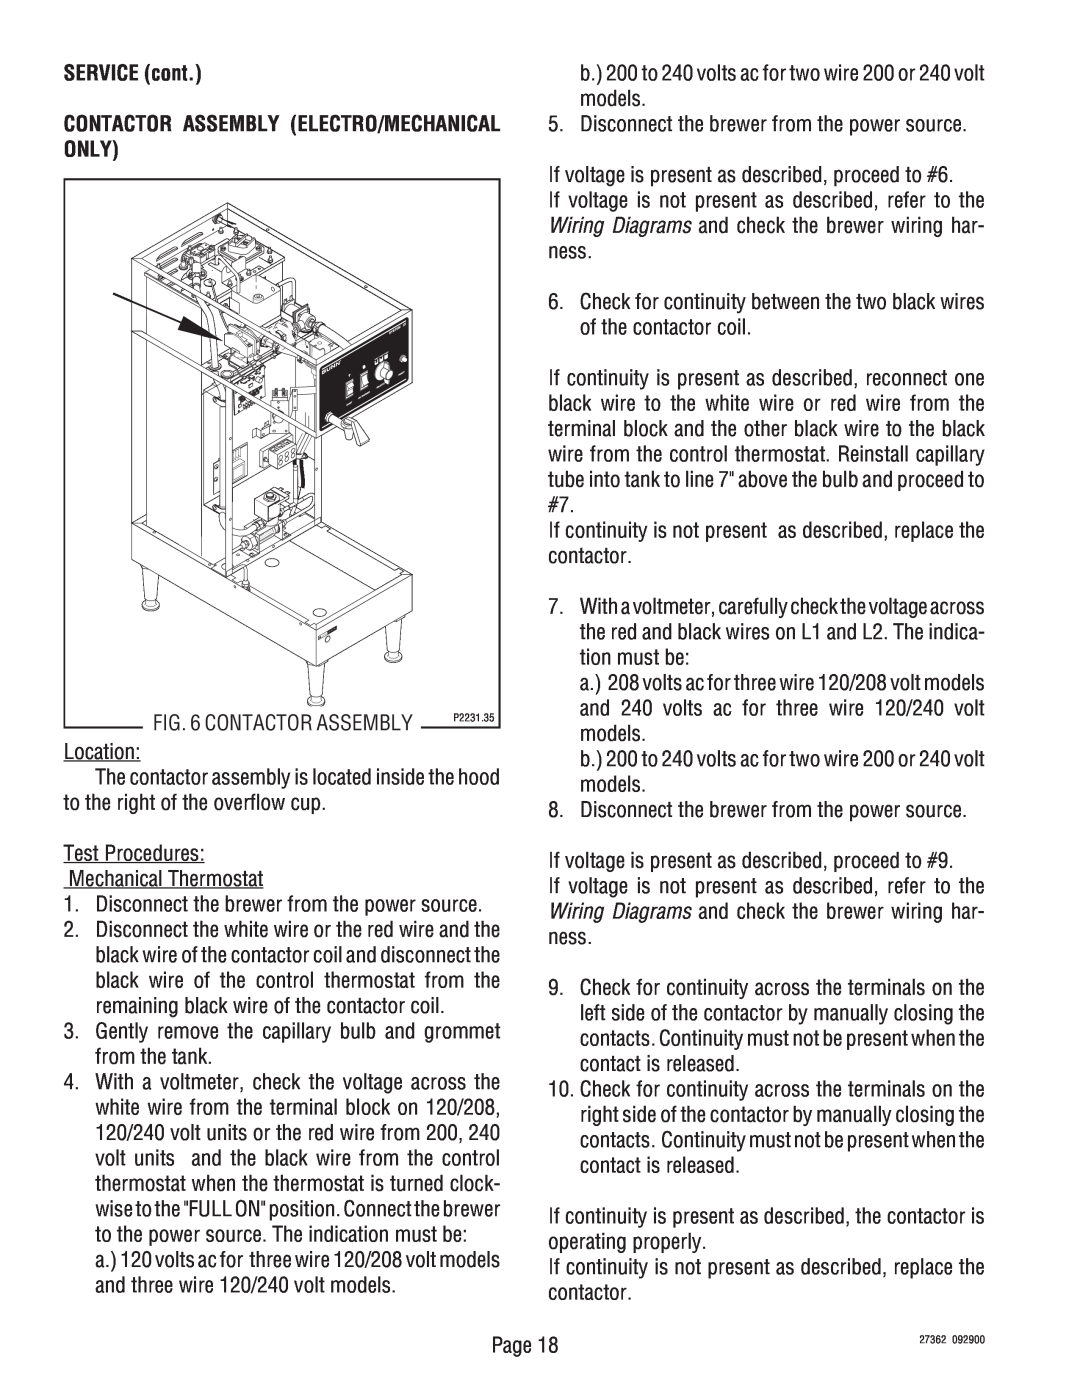 Bunn System III manual SERVICE cont, Contactor Assembly Electro/Mechanical Only 